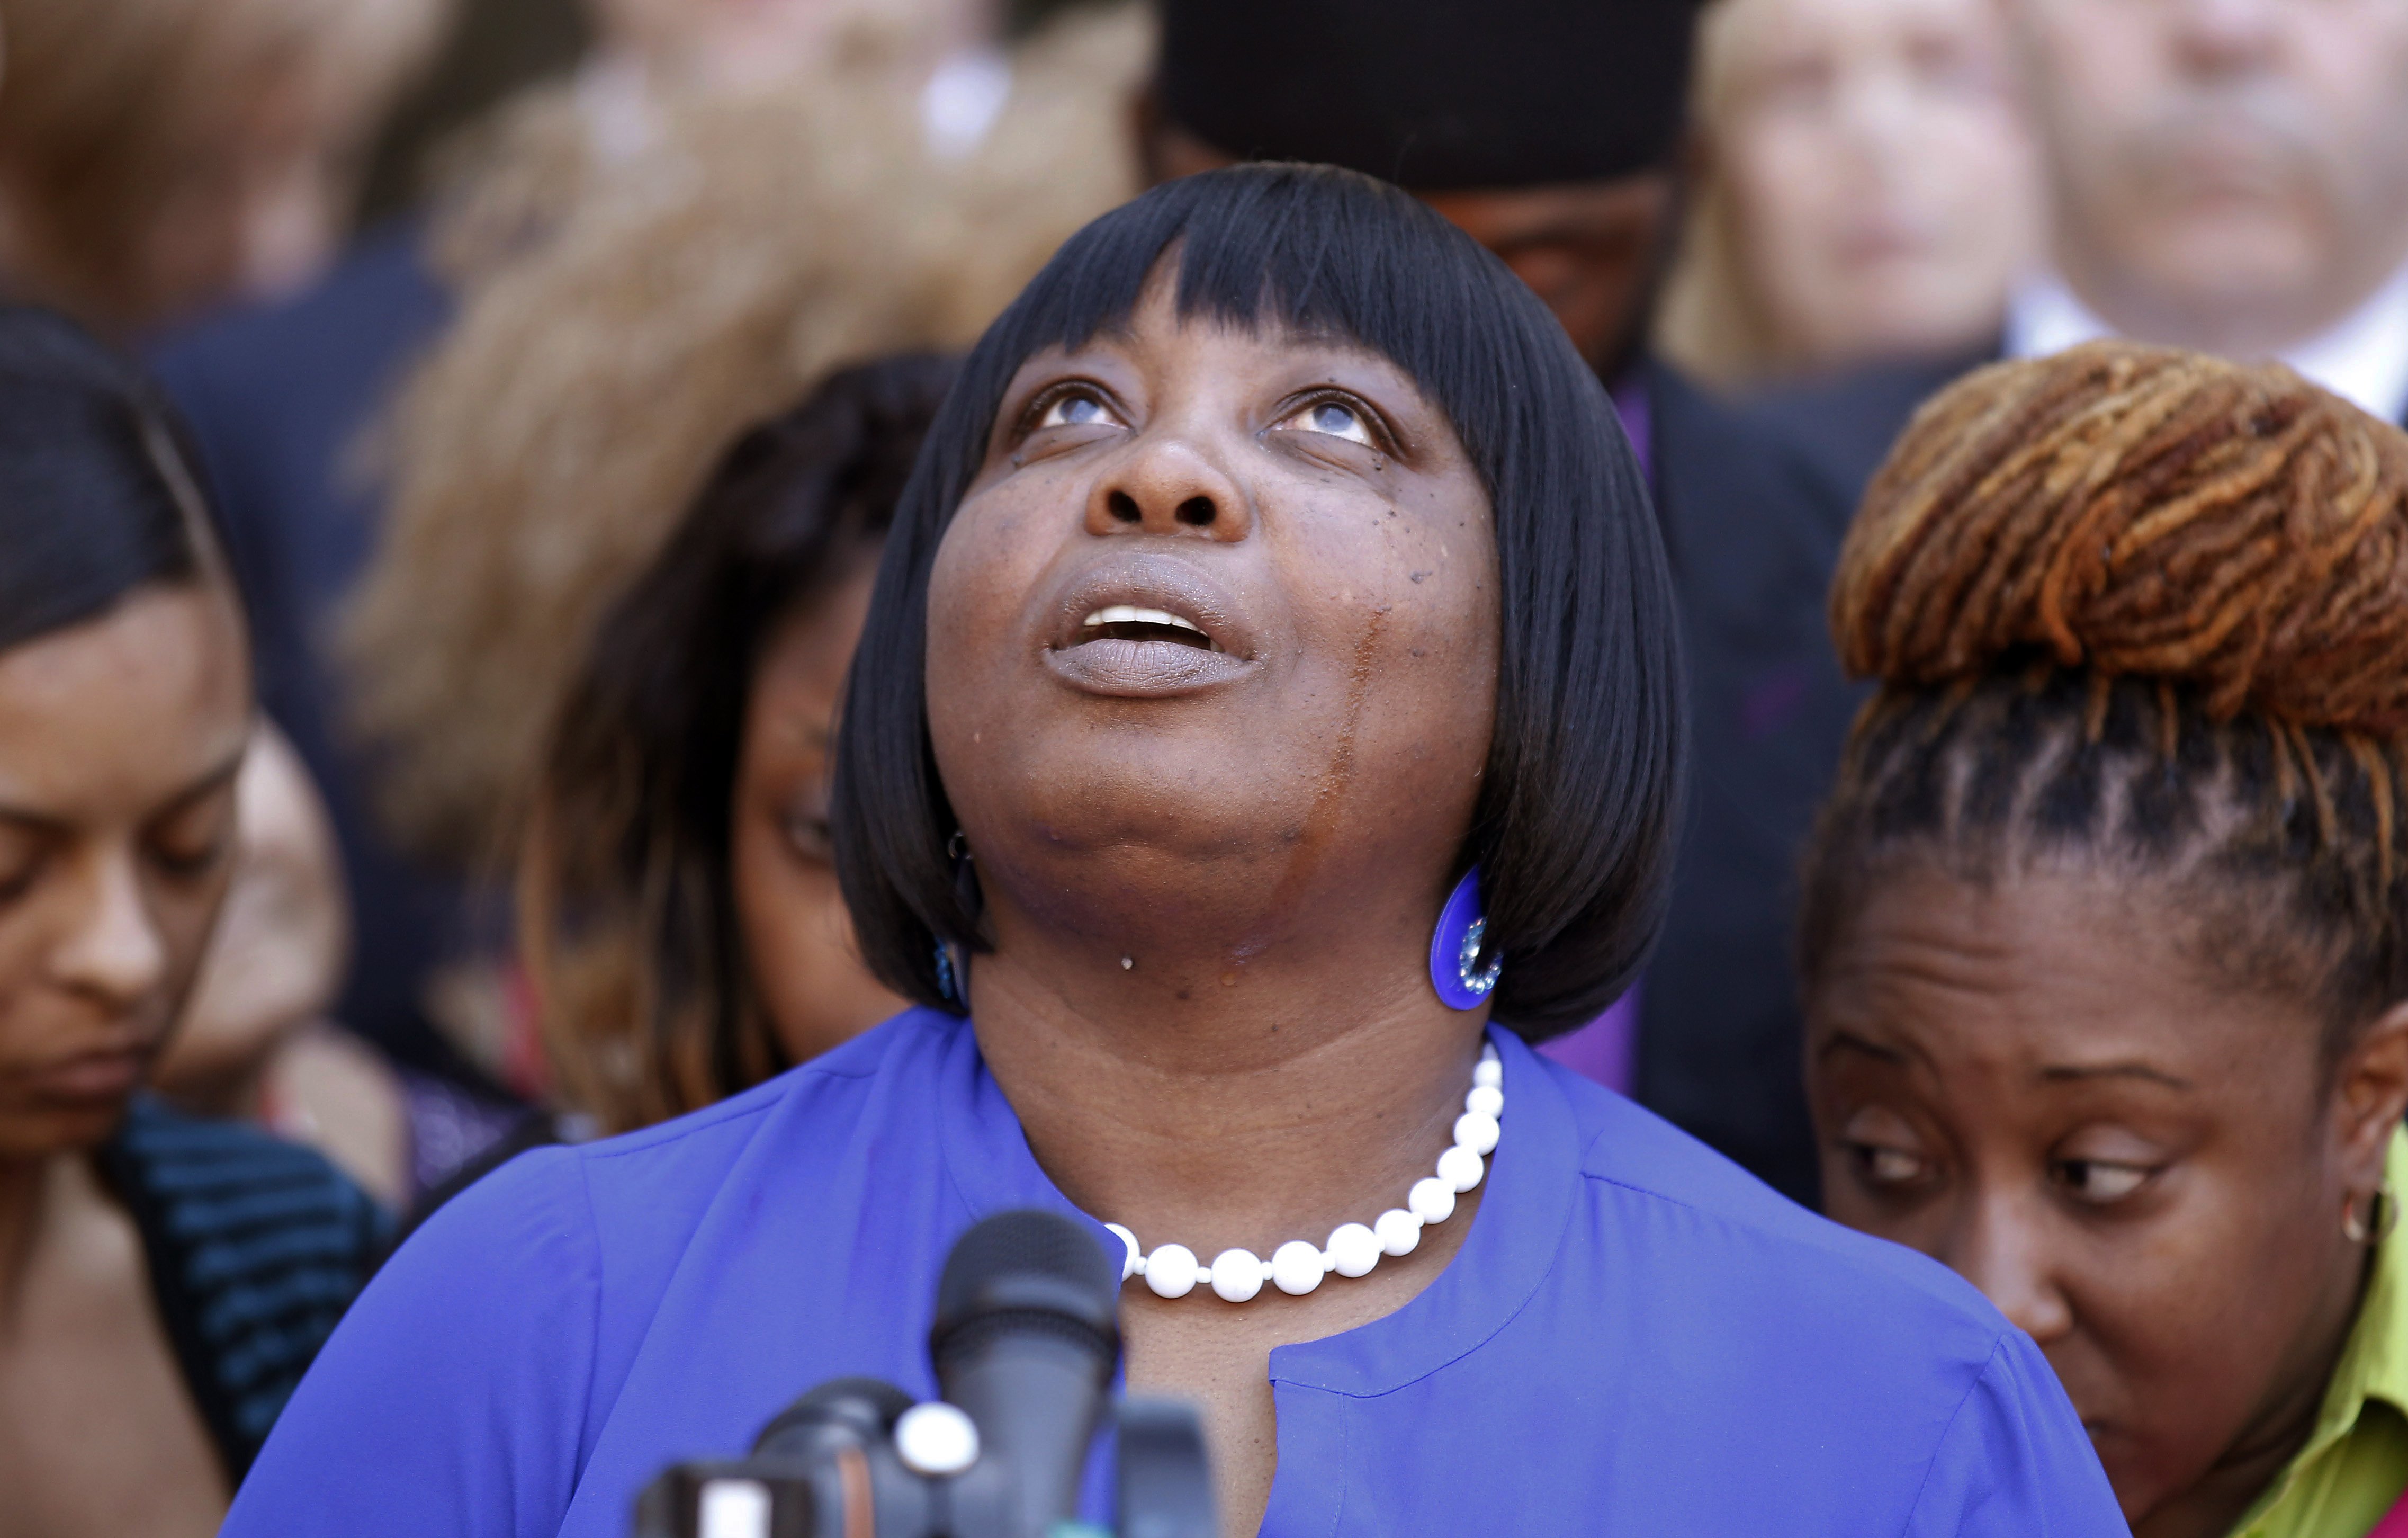 Ursula Ward, mother of shooting victim Odin Lloyd, looks up to the heavens as she talks about her deceased son outside Bristol County Superior Court on April 15, 2015, in Fall River, Mass., after former New England Patriots football player Aaron Hernandez was found guilty of murder in the shooting death of Odin Lloyd. (Stew Milne—AP)